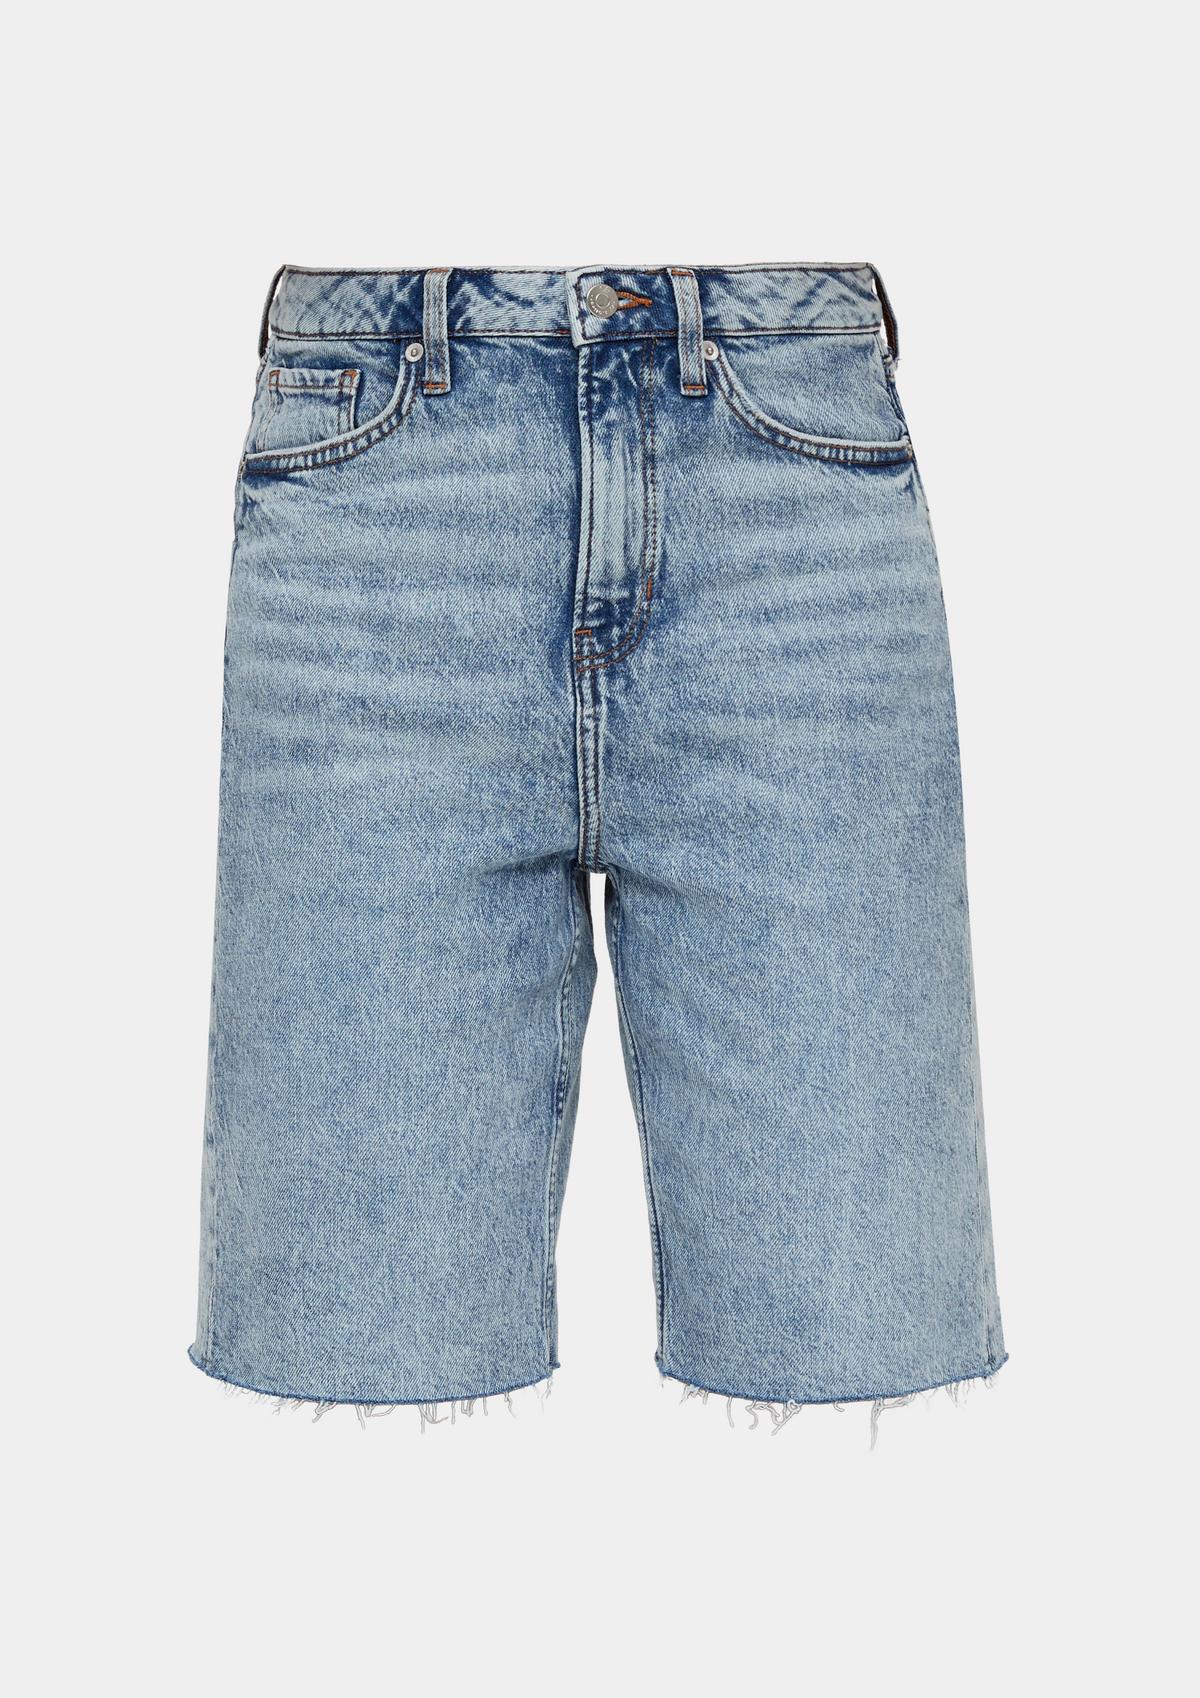 s.Oliver Mom fit: denim Bermuda shorts with a high-rise waist